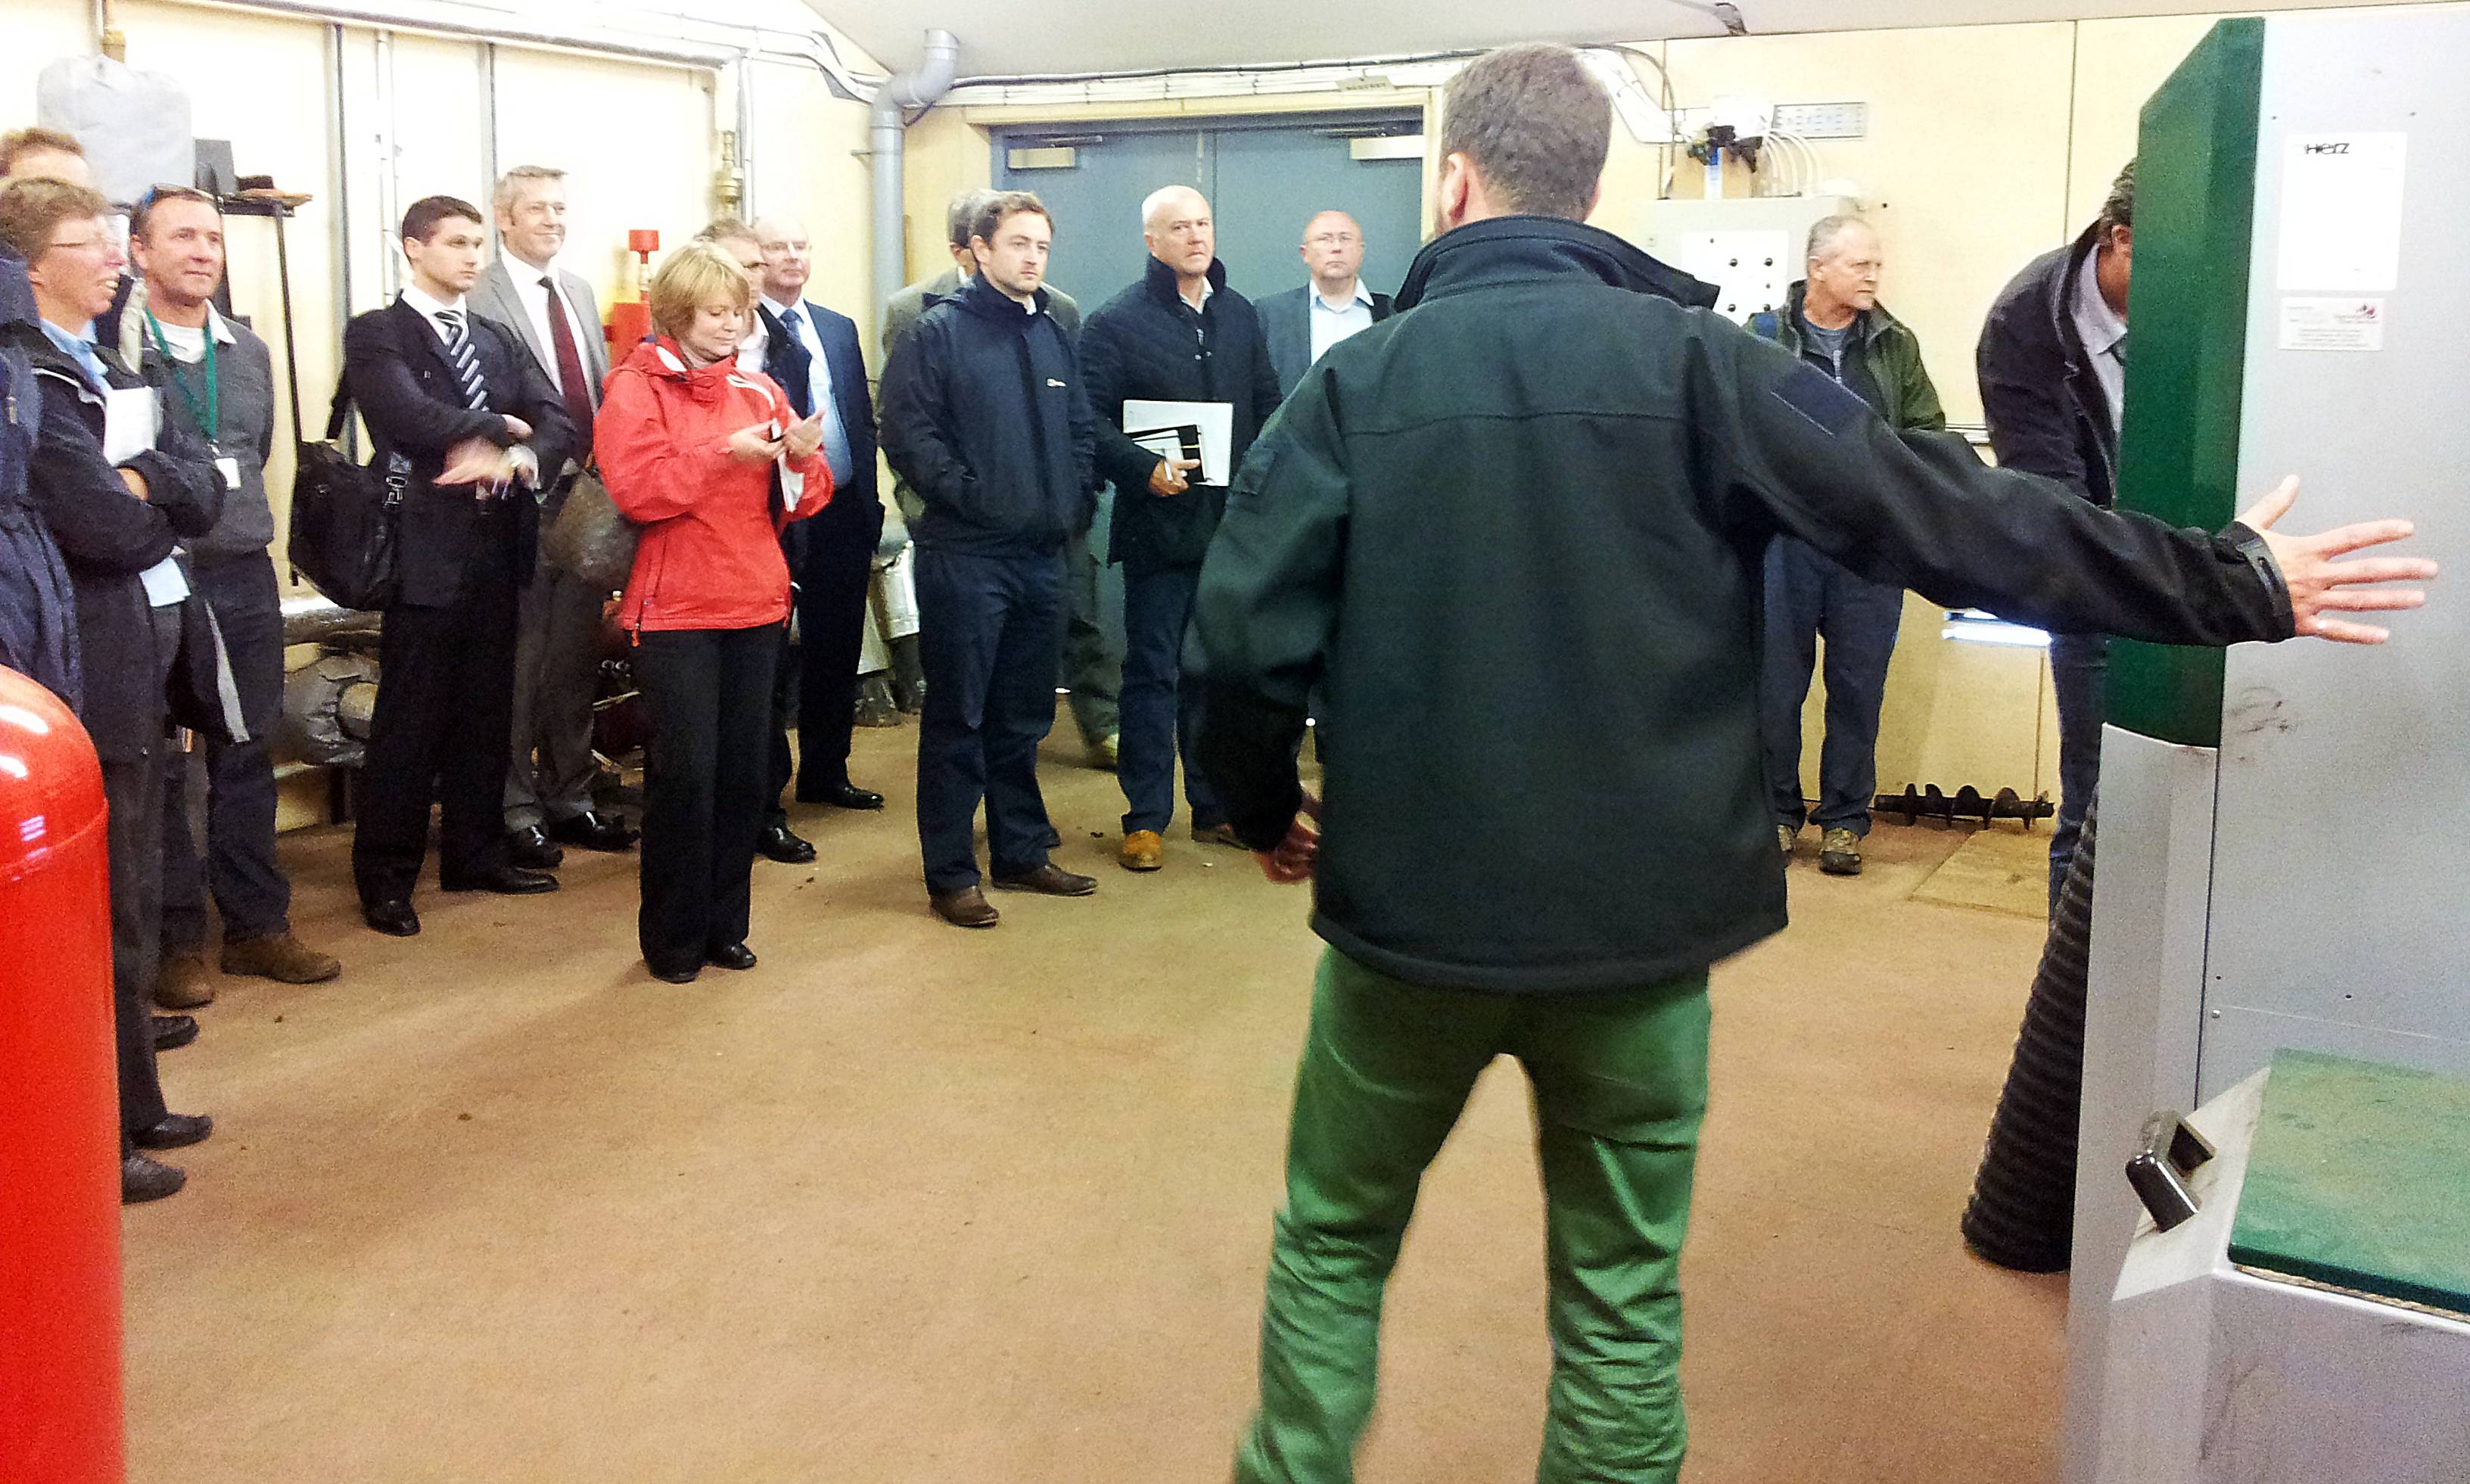 Delegates learn more about the Herz BioMatic biomass boiler in situ